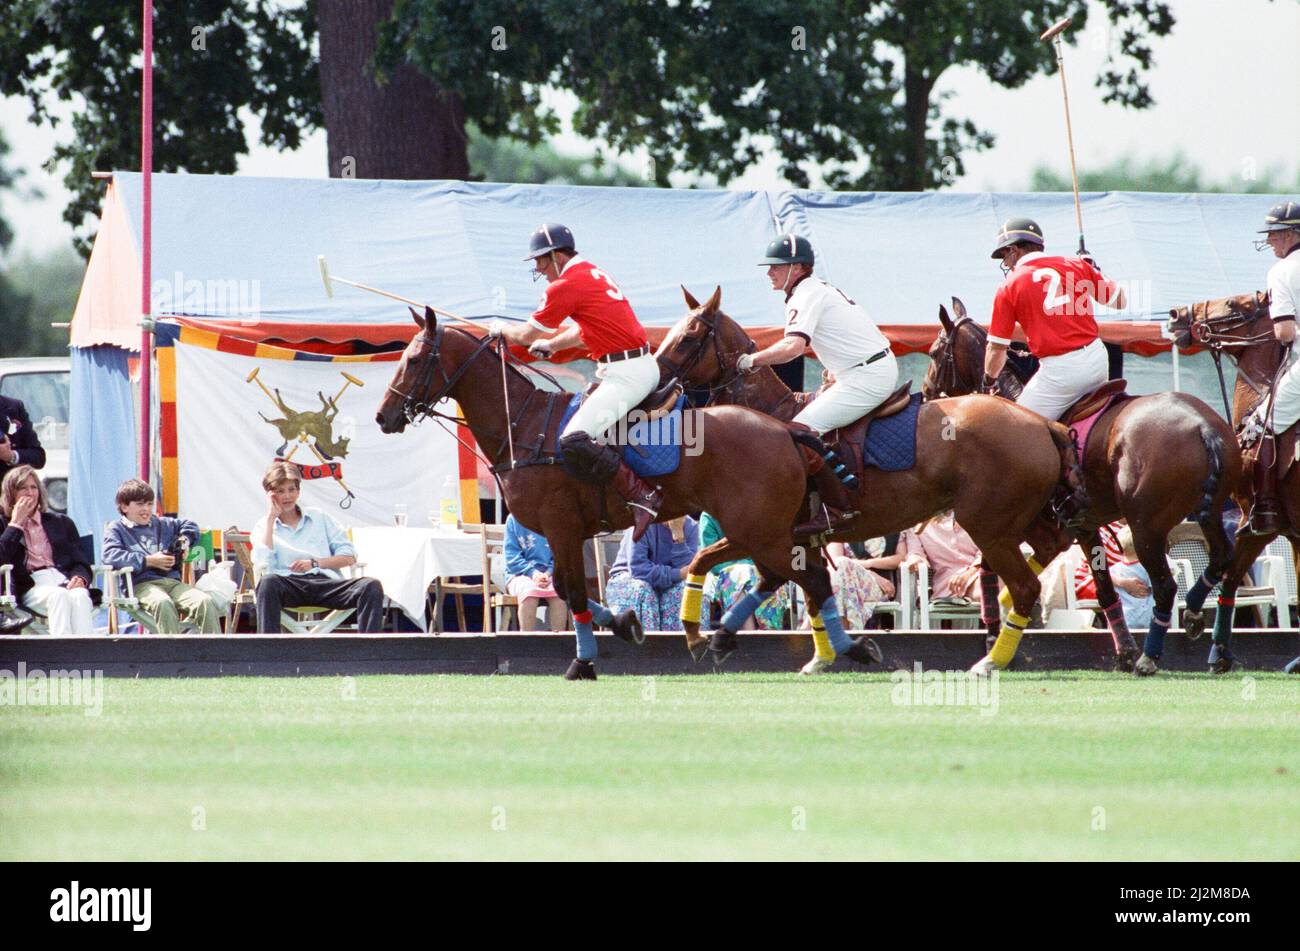 Prince Charles (Red shirt wearing number 3) was locked in a fierce battle with Princess Diana's friend Major James Hewitt  today (white shirt wearing number 2) , on the polo field. At one stage, as Major Hewitt challenged the prince, the commentator exclaimed 'Oh, I say ! That riding off was a bit  rough'  Despite determined riding by Charles, the Gulf hero's team won 4-1 at Windsor.  The polo prizes were presented by another royal, Princess Beatrice, the two year old daughter of The Duchess of York and Prince Andrew.  Picture taken 16th July 1991 Stock Photo